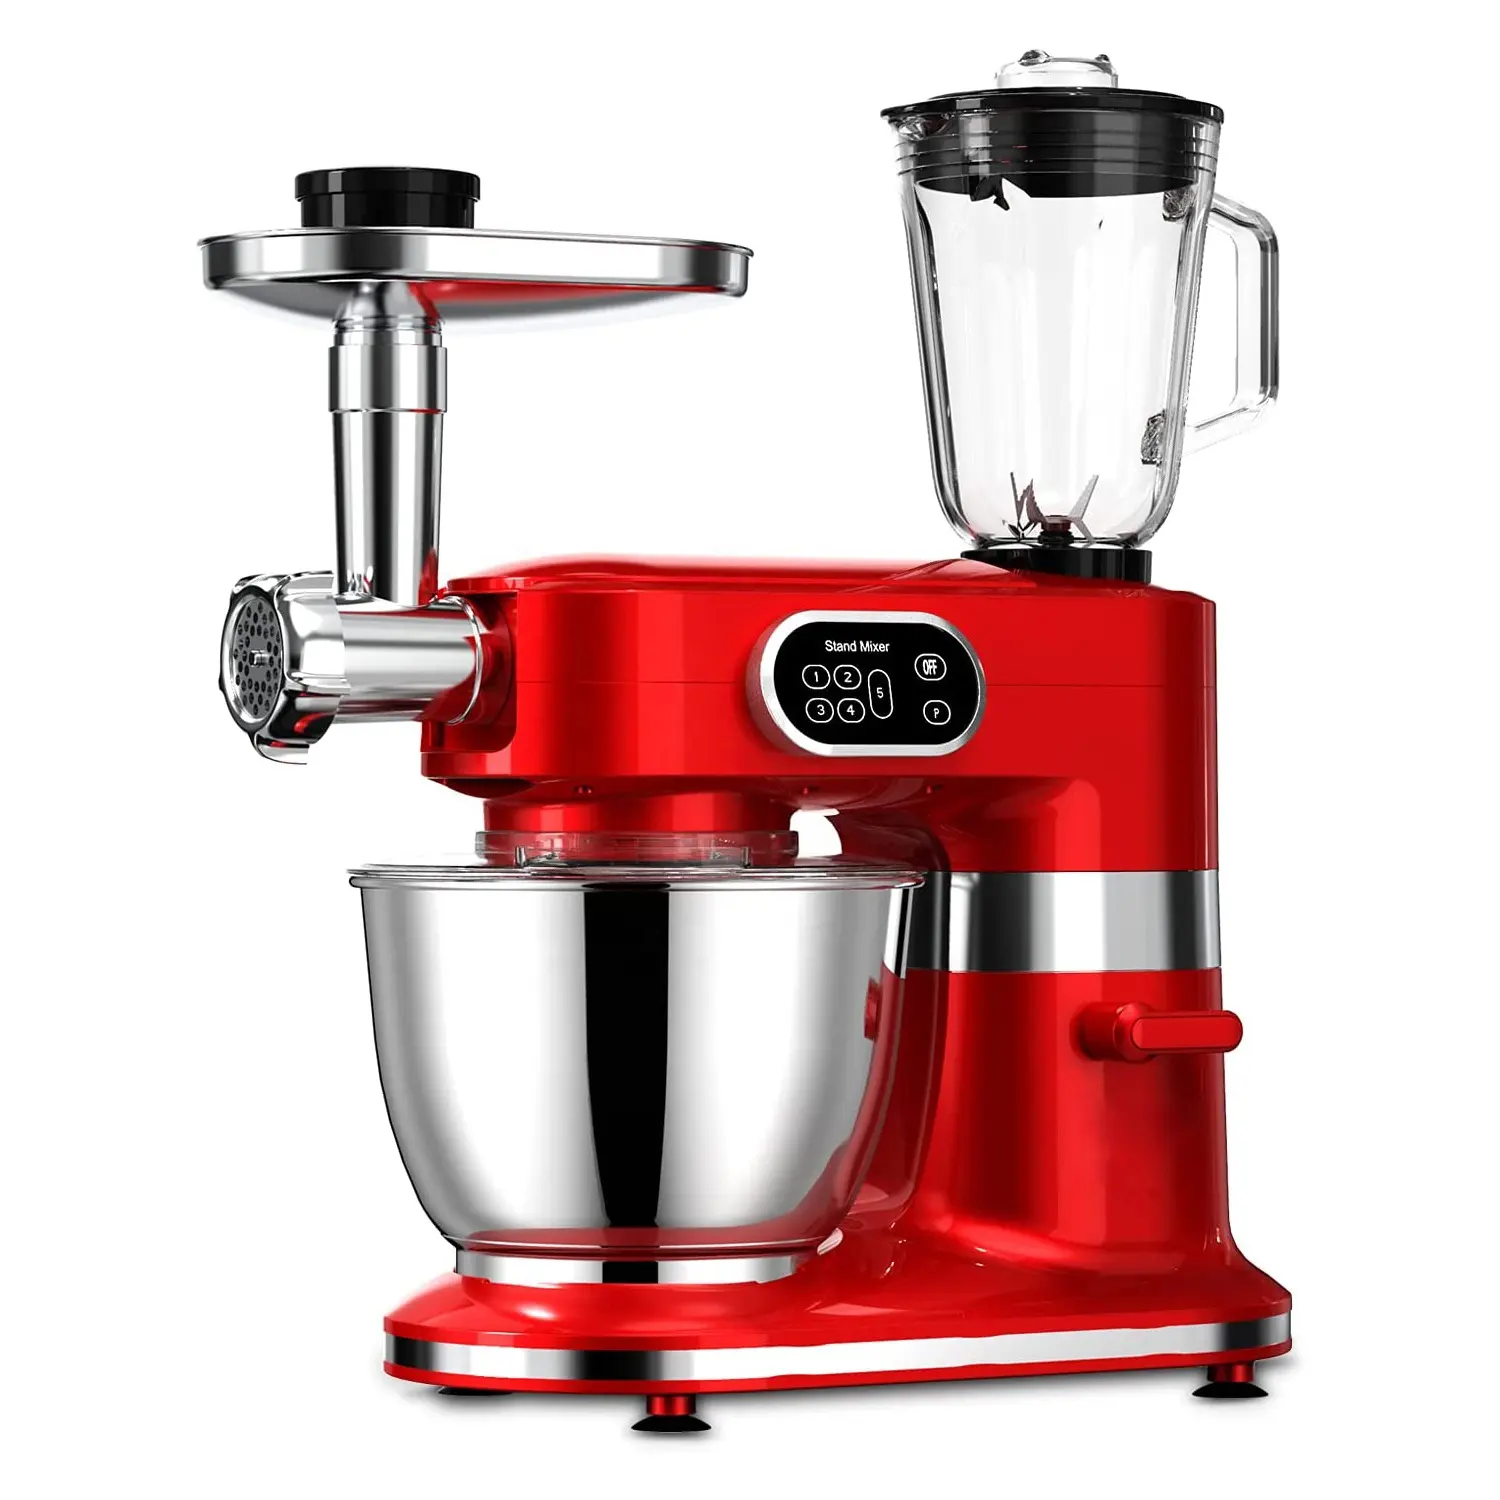 Stand Mixer 7L 1500W , 8 in 1 Multifunctional Kitchen Mixer with Meat Meat Grinder, Blender, Dough Hook, Whisk, Beater, Pasta